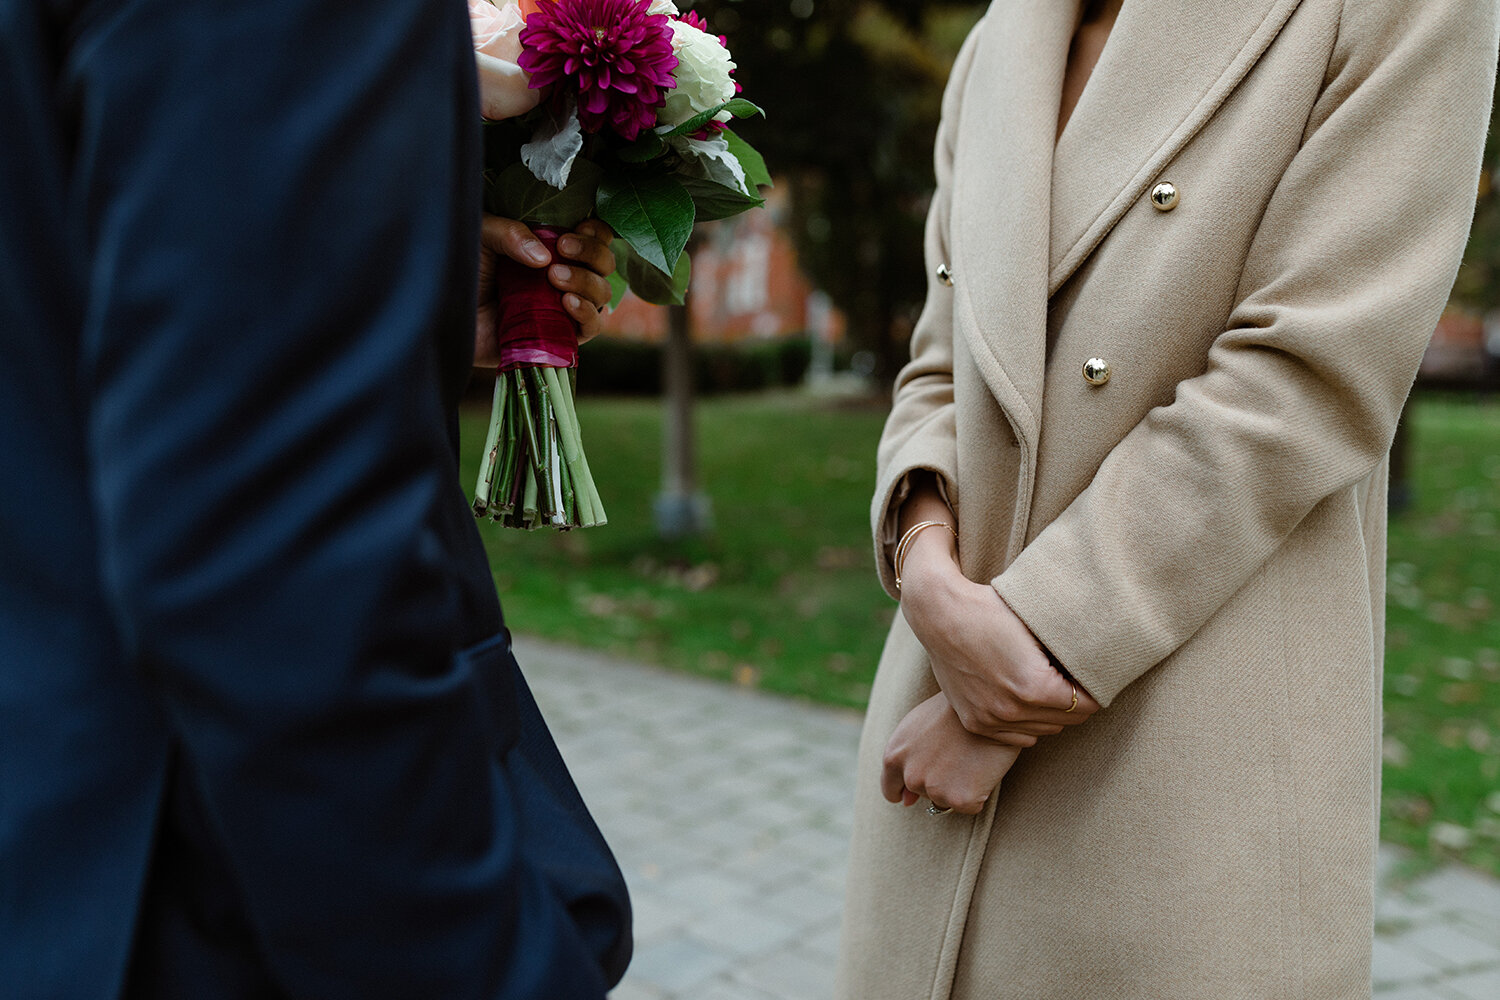 Small-Intimate-Elopement-Downtown-Toronto-U-of-T-Vows-where-to-elope-in-toronto-14.JPG